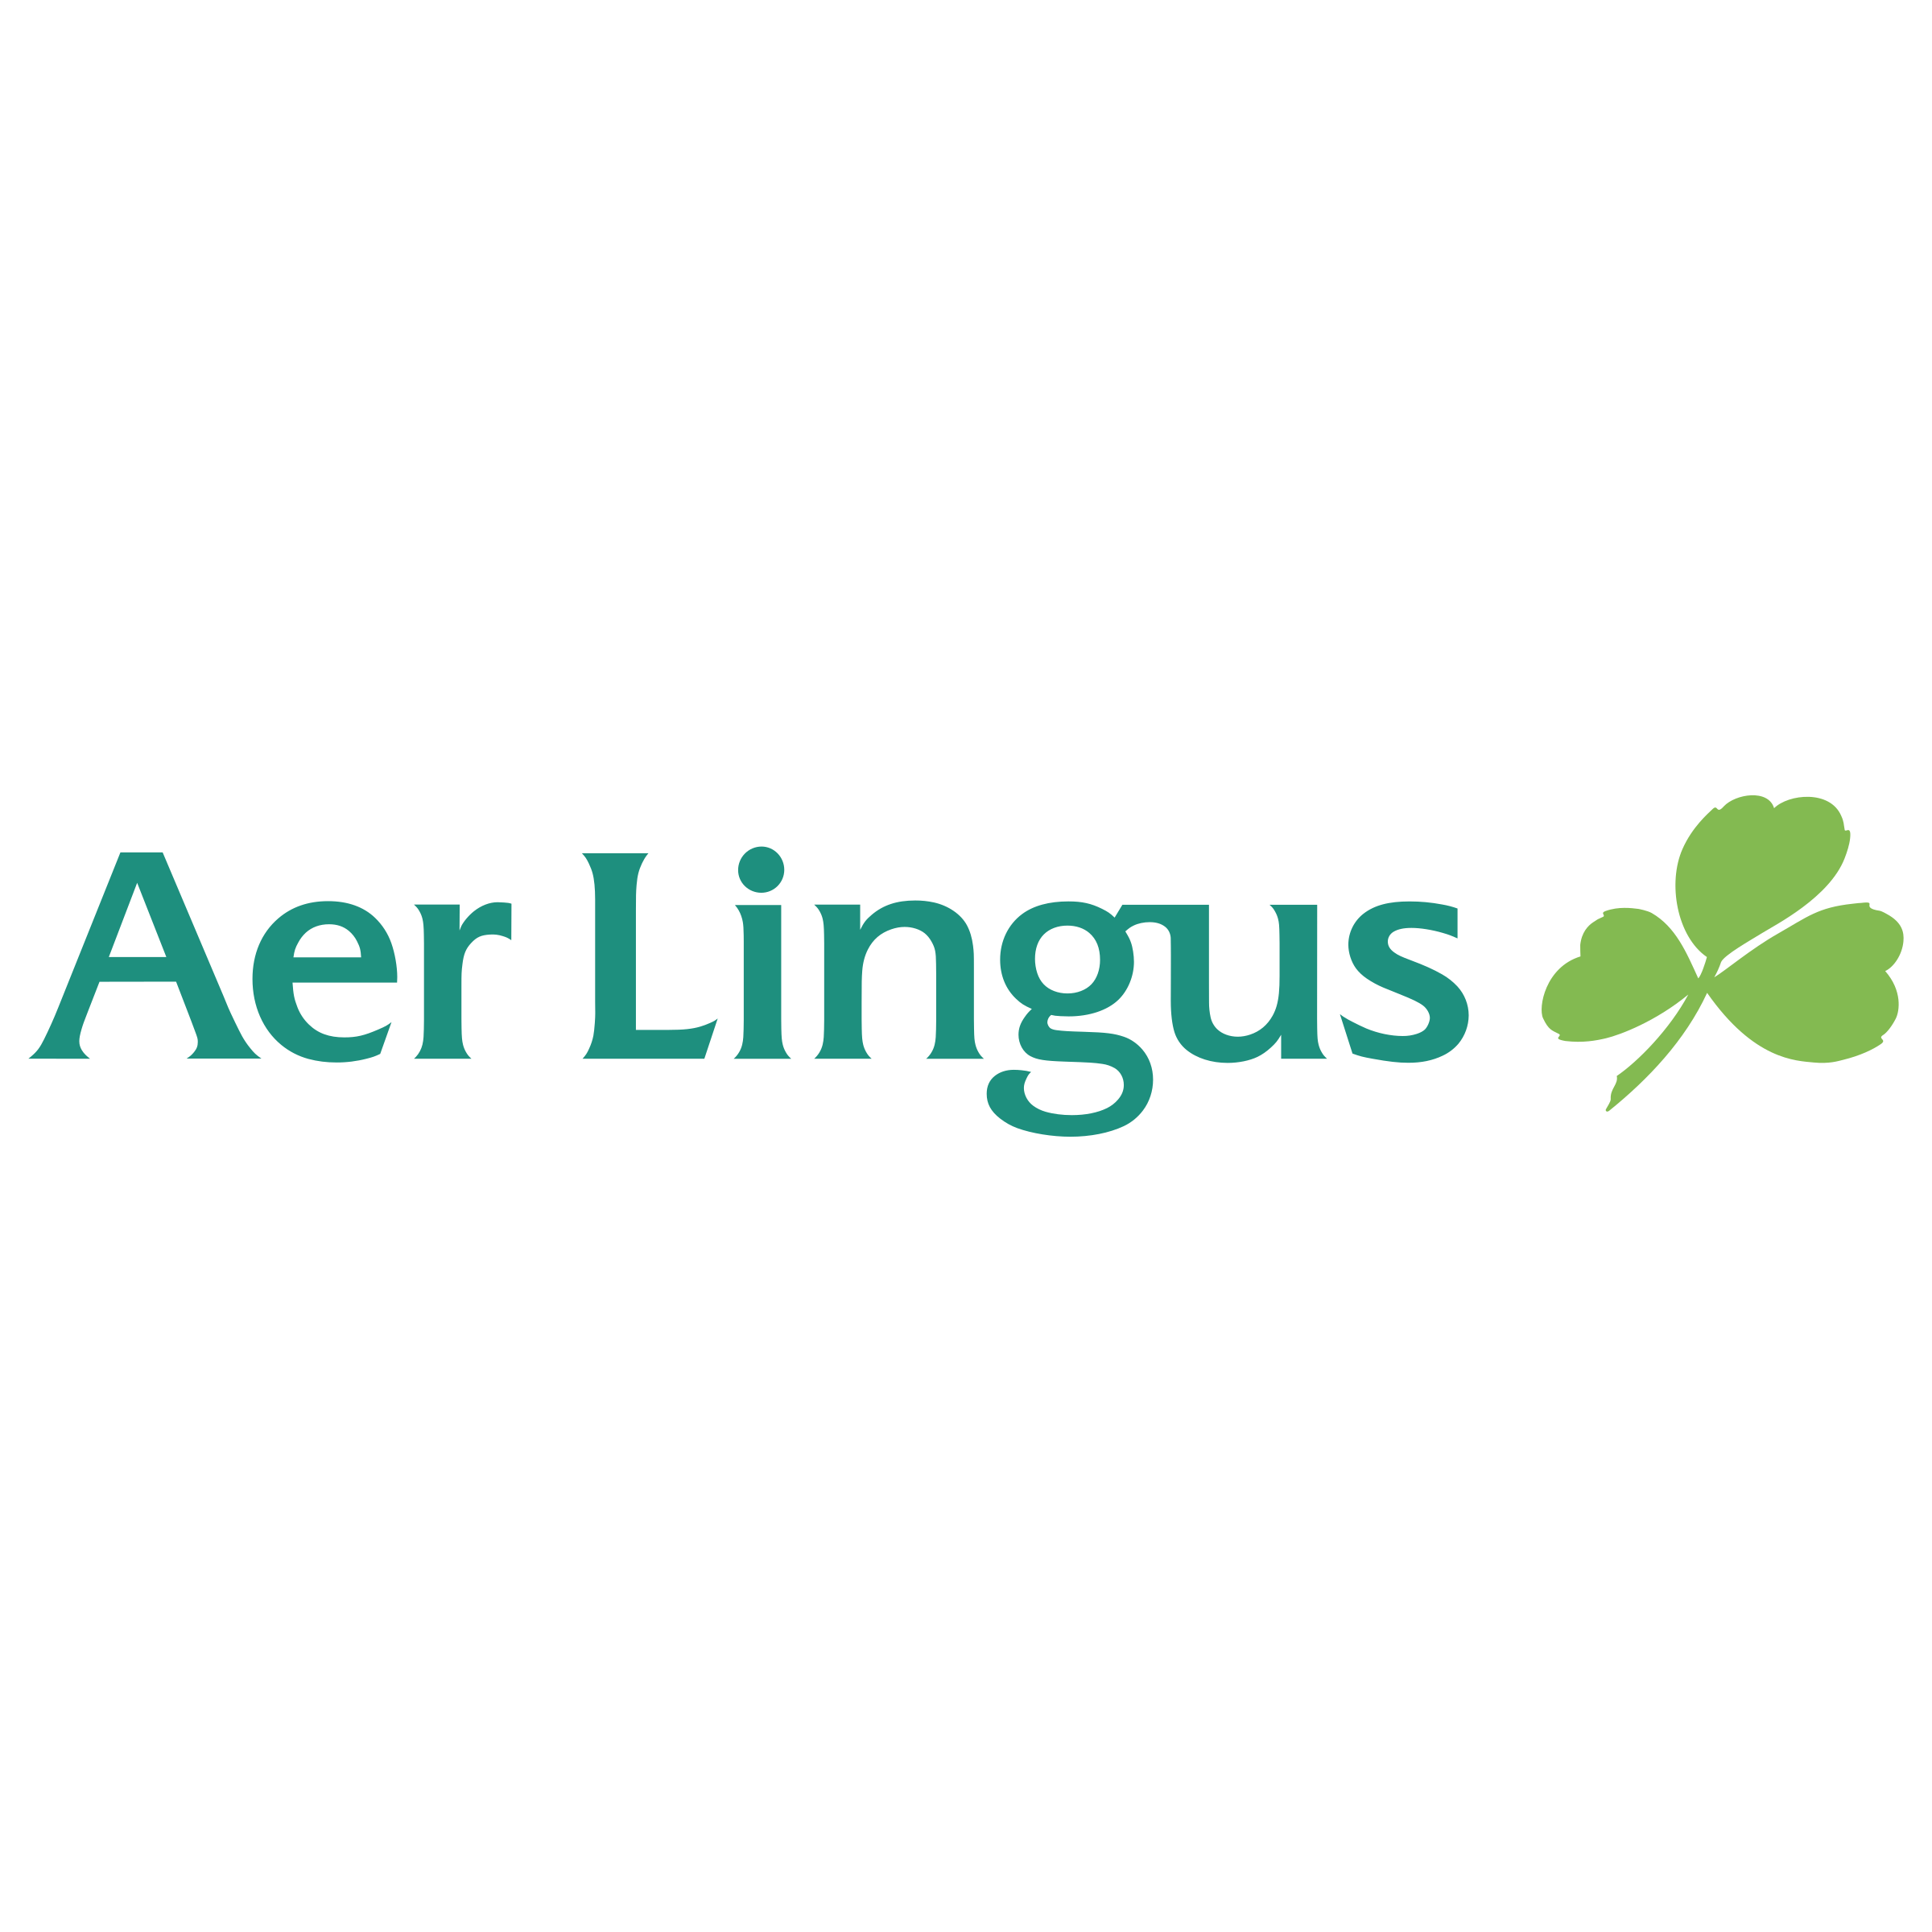 National airline of Republic of Ireland